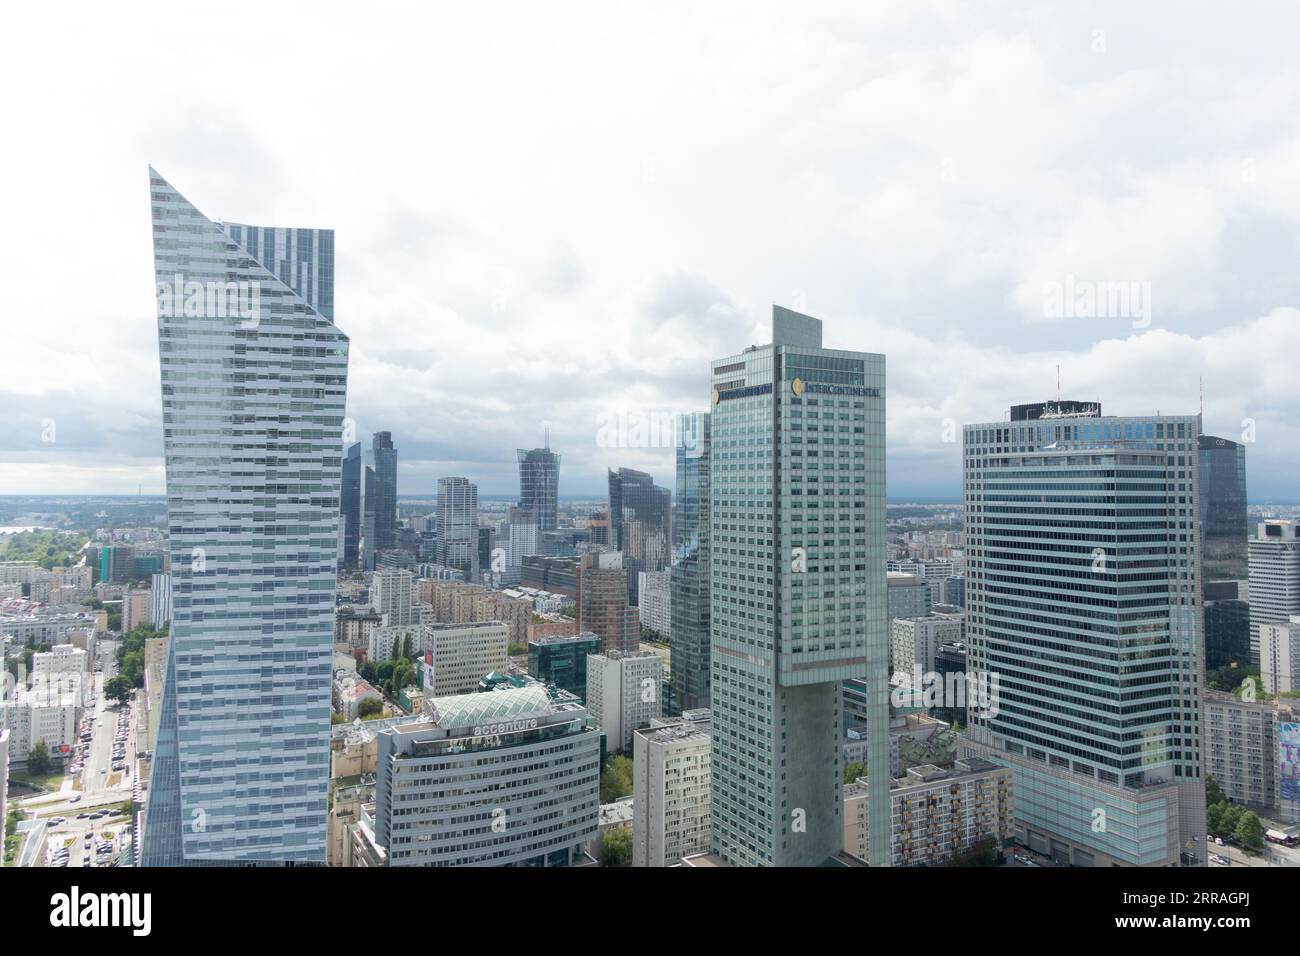 A view of the Warsaw skyline, Warsaw, Poland Stock Photo